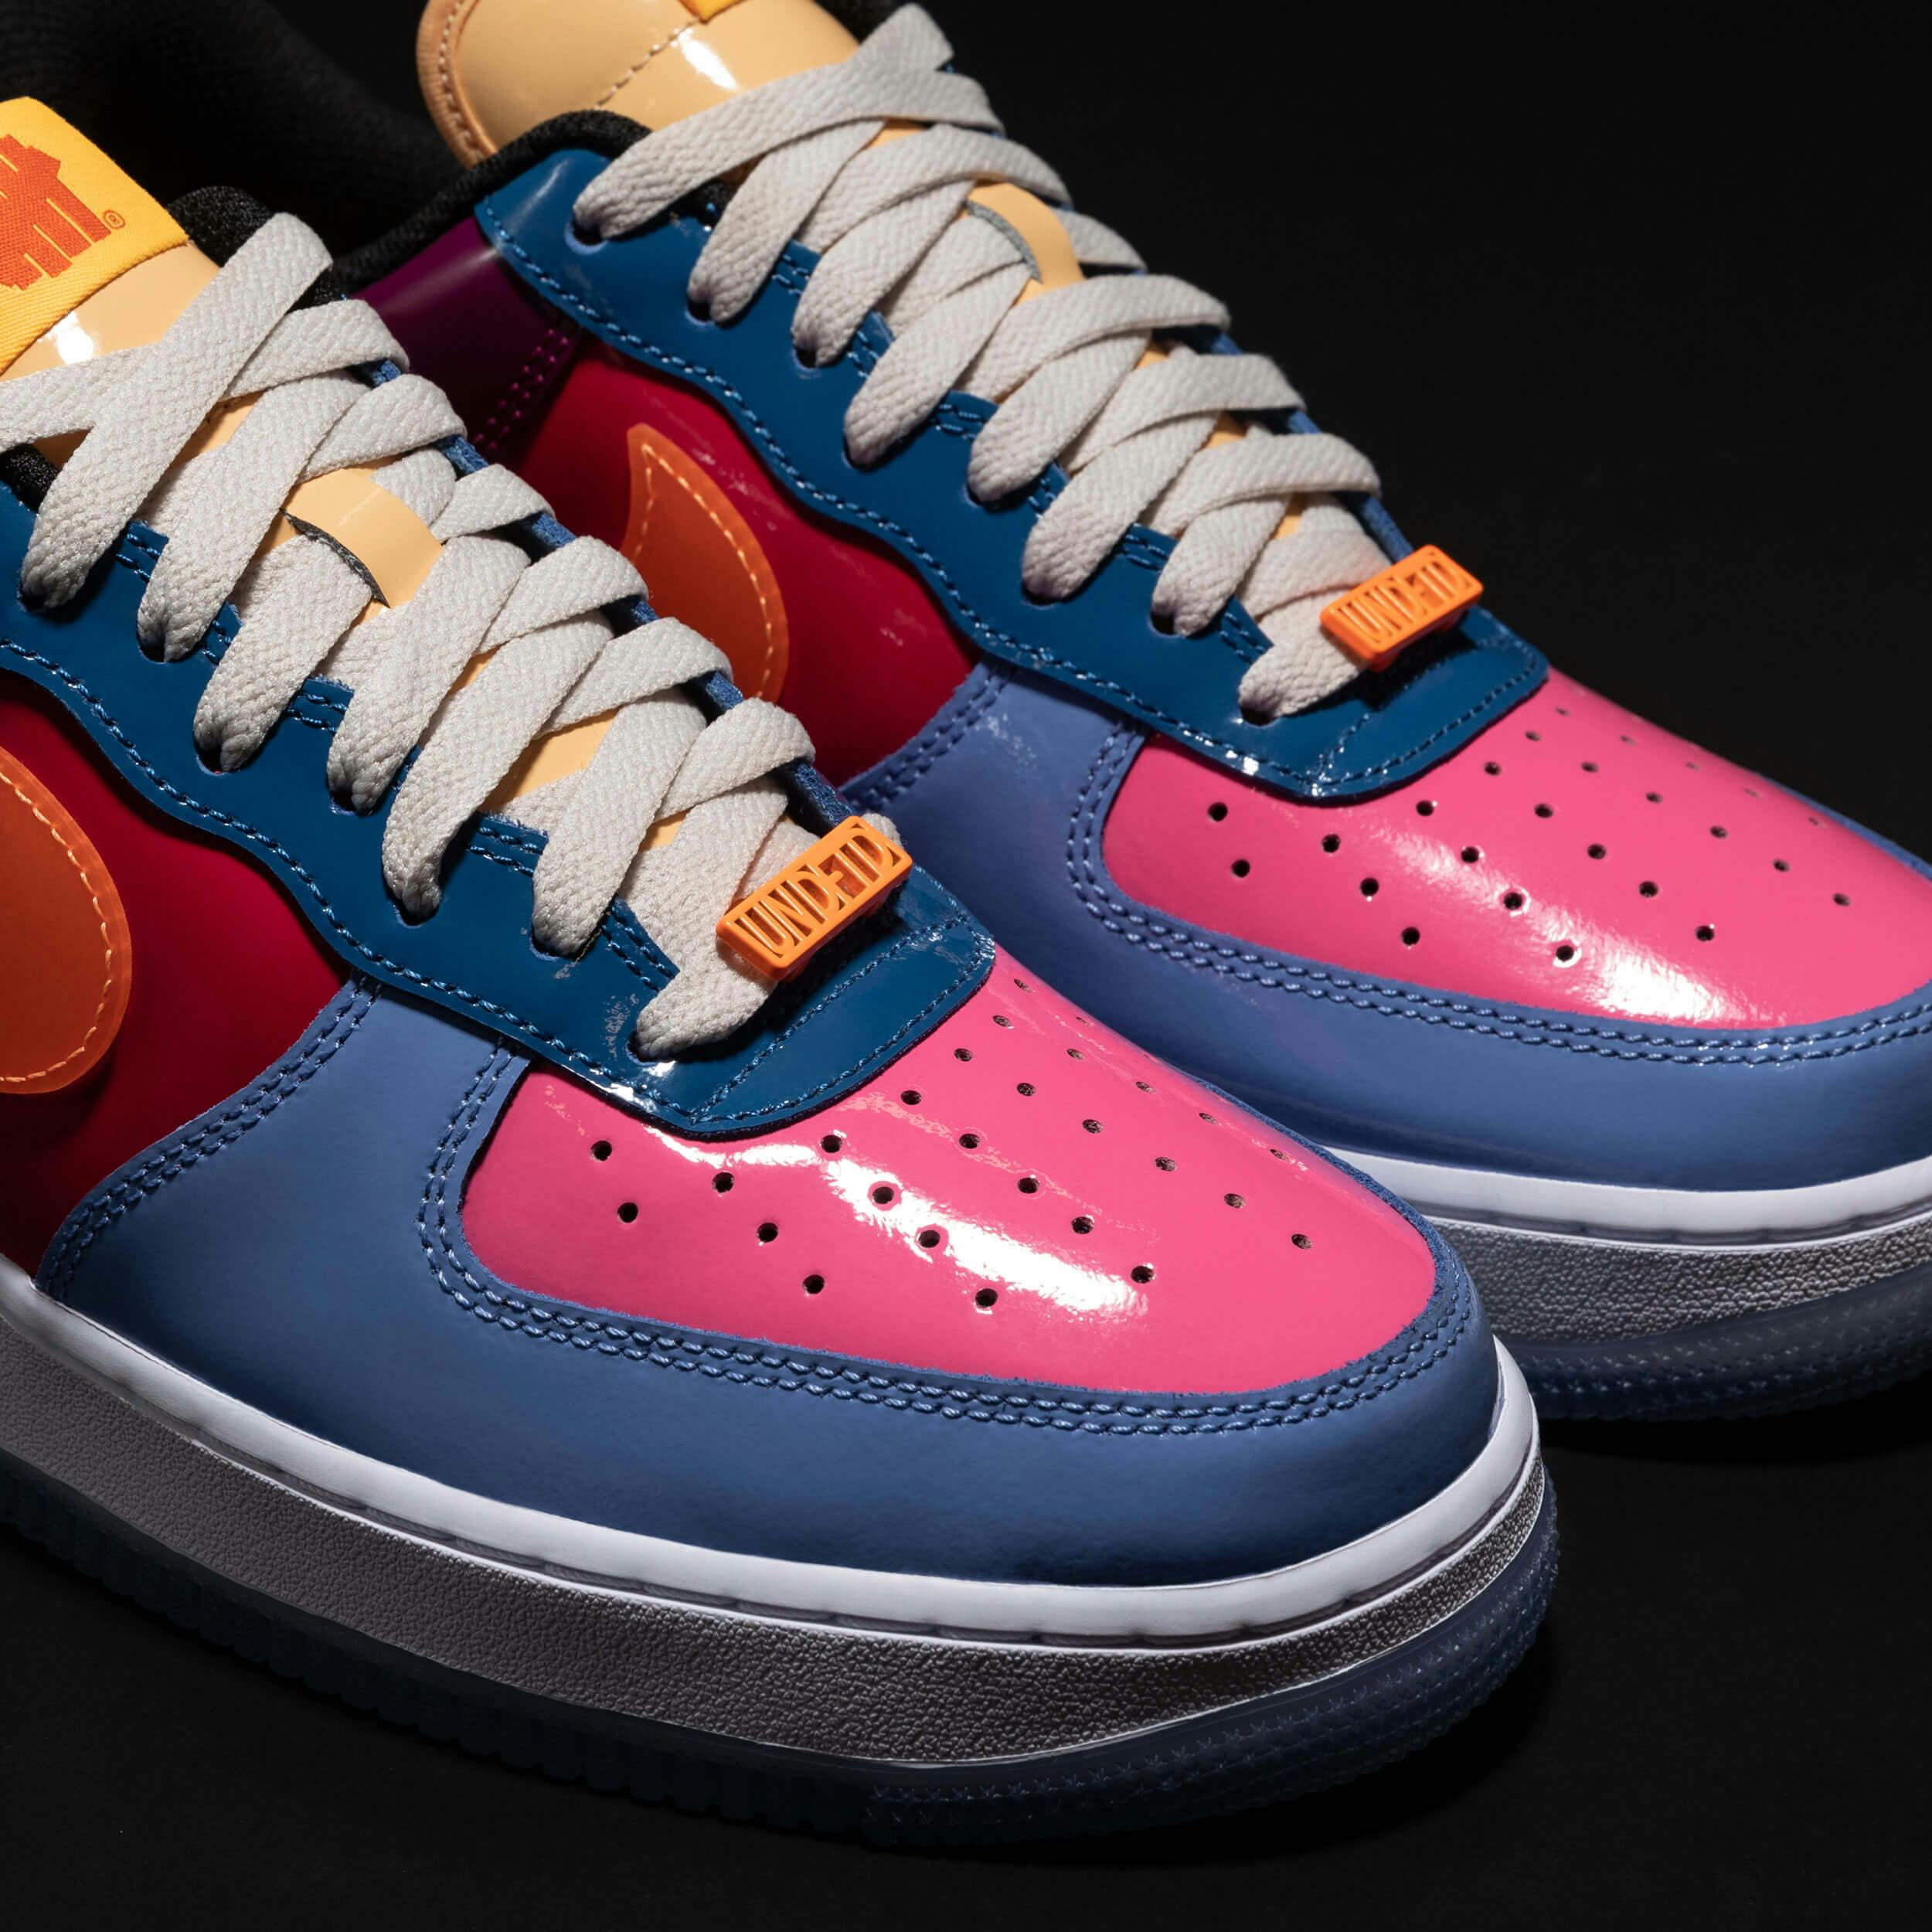 Undefeated Announces First Patent Pack Nike Air Force 1 Release